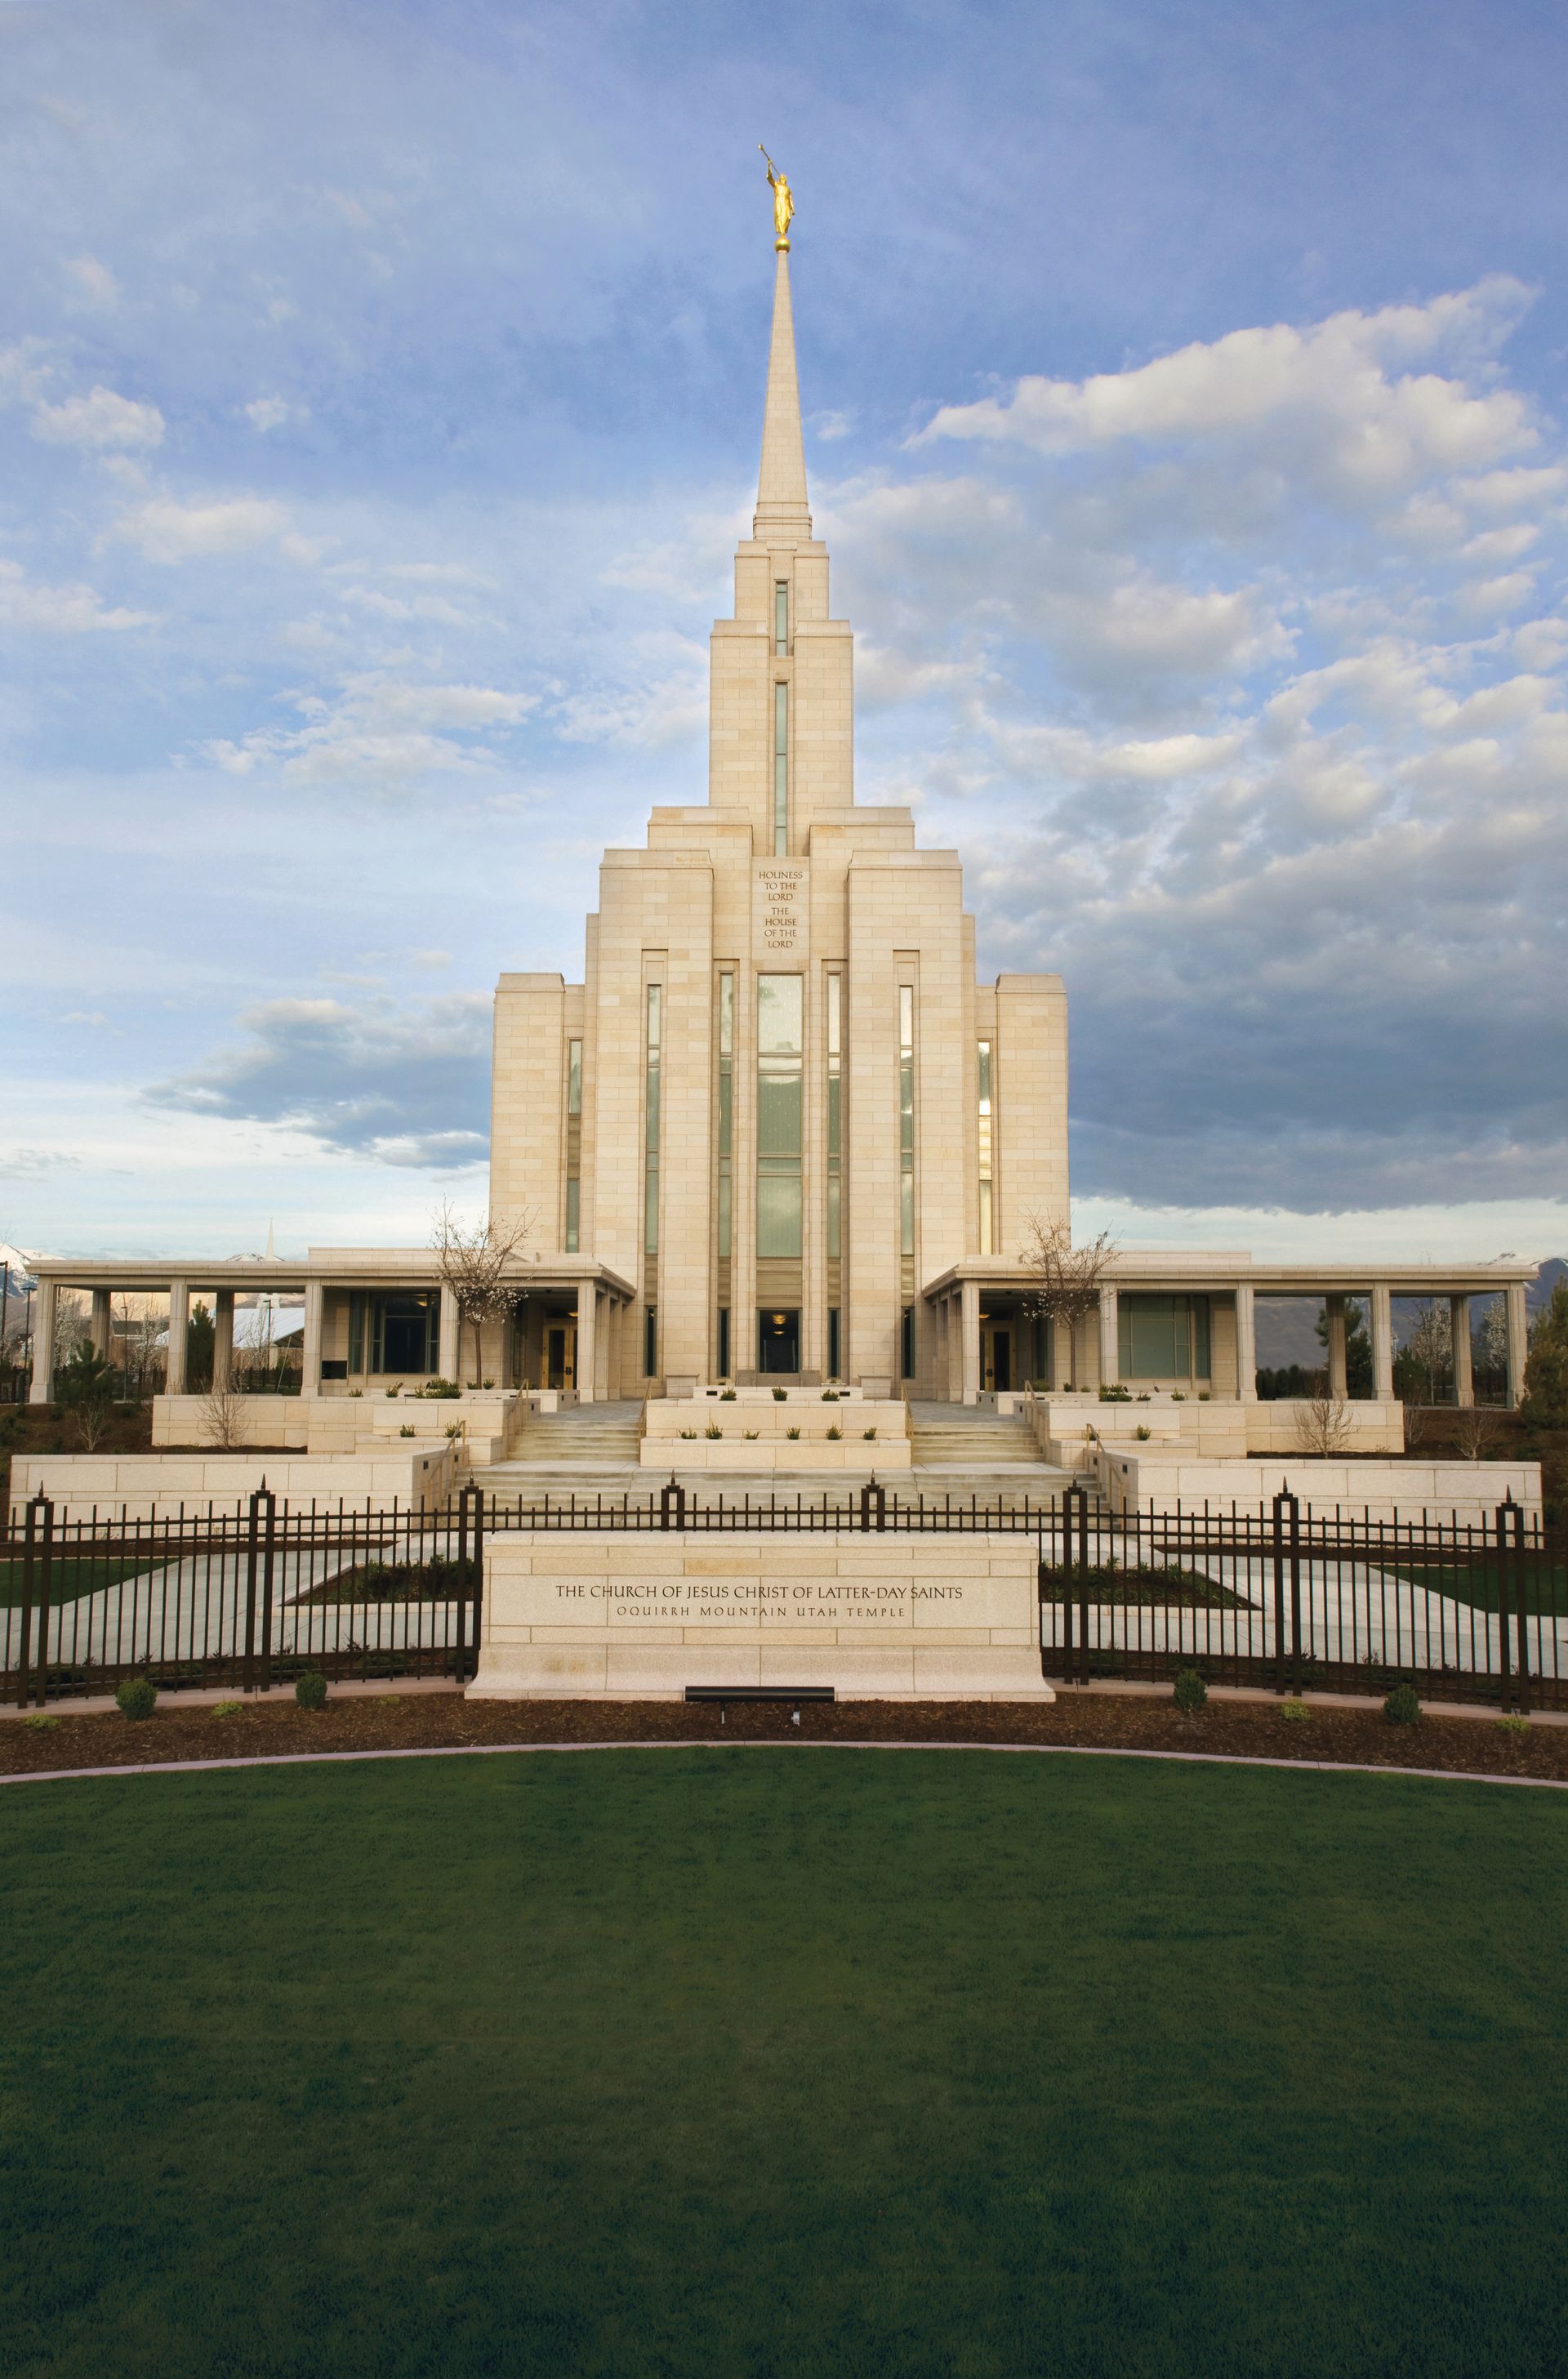 The Oquirrh Mountain Utah Temple, including name sign and entrance.